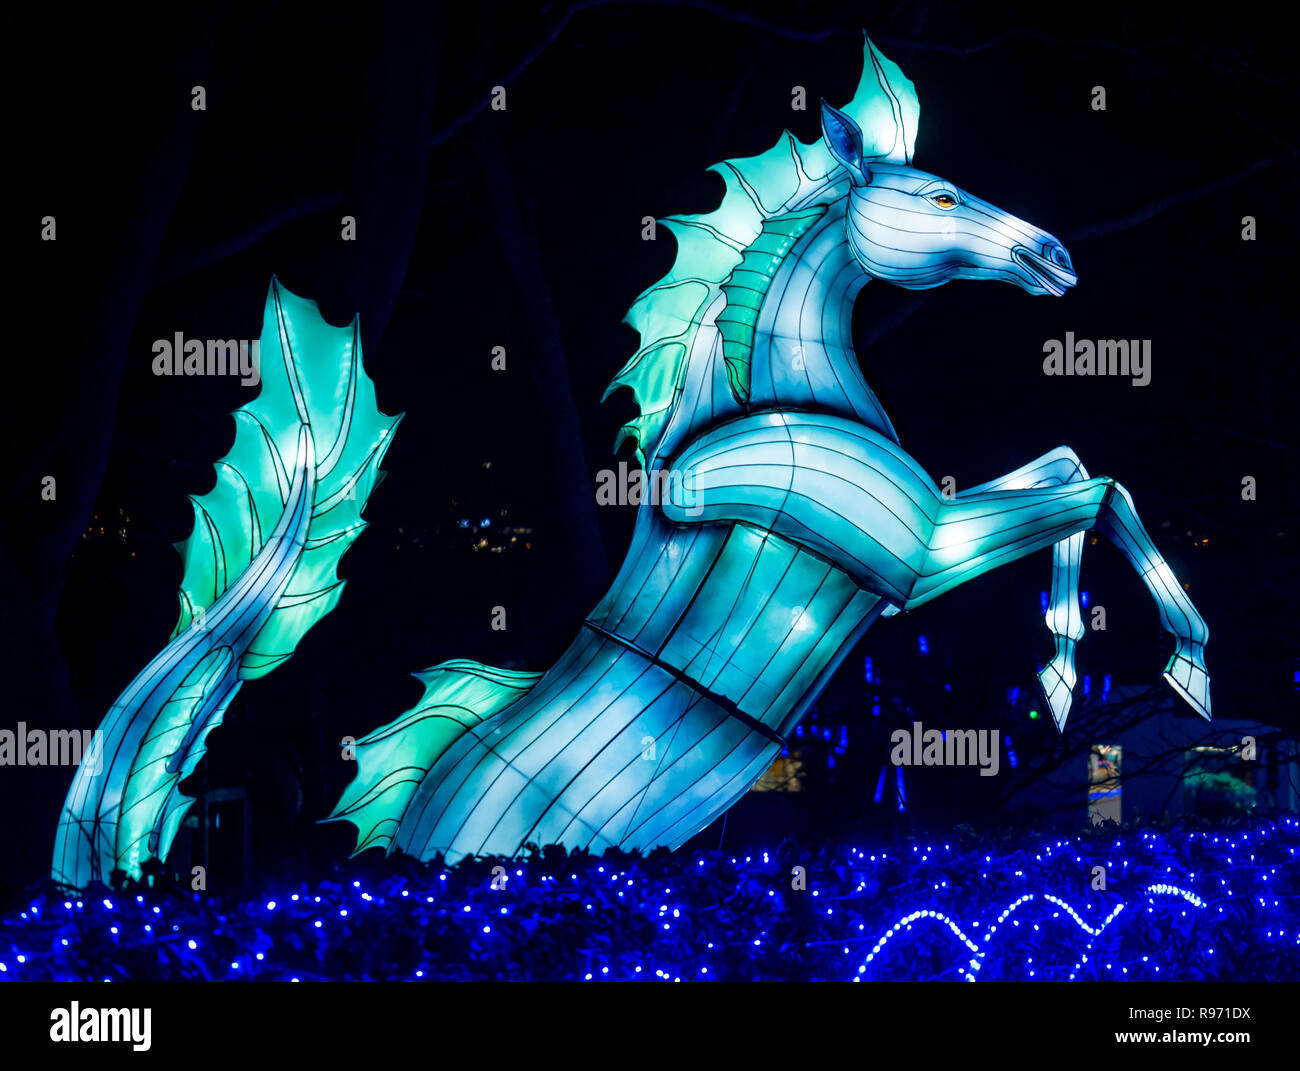 Edinburgh Zoo, Edinburgh, Scotland, United Kingdom, 20th December 2018. Giant Lanterns of China display at the zoo with colourful lantern displays of animals and mythical creatures lighting a magical trail through the Zoo over Christmas. A rearing horse Stock Photo